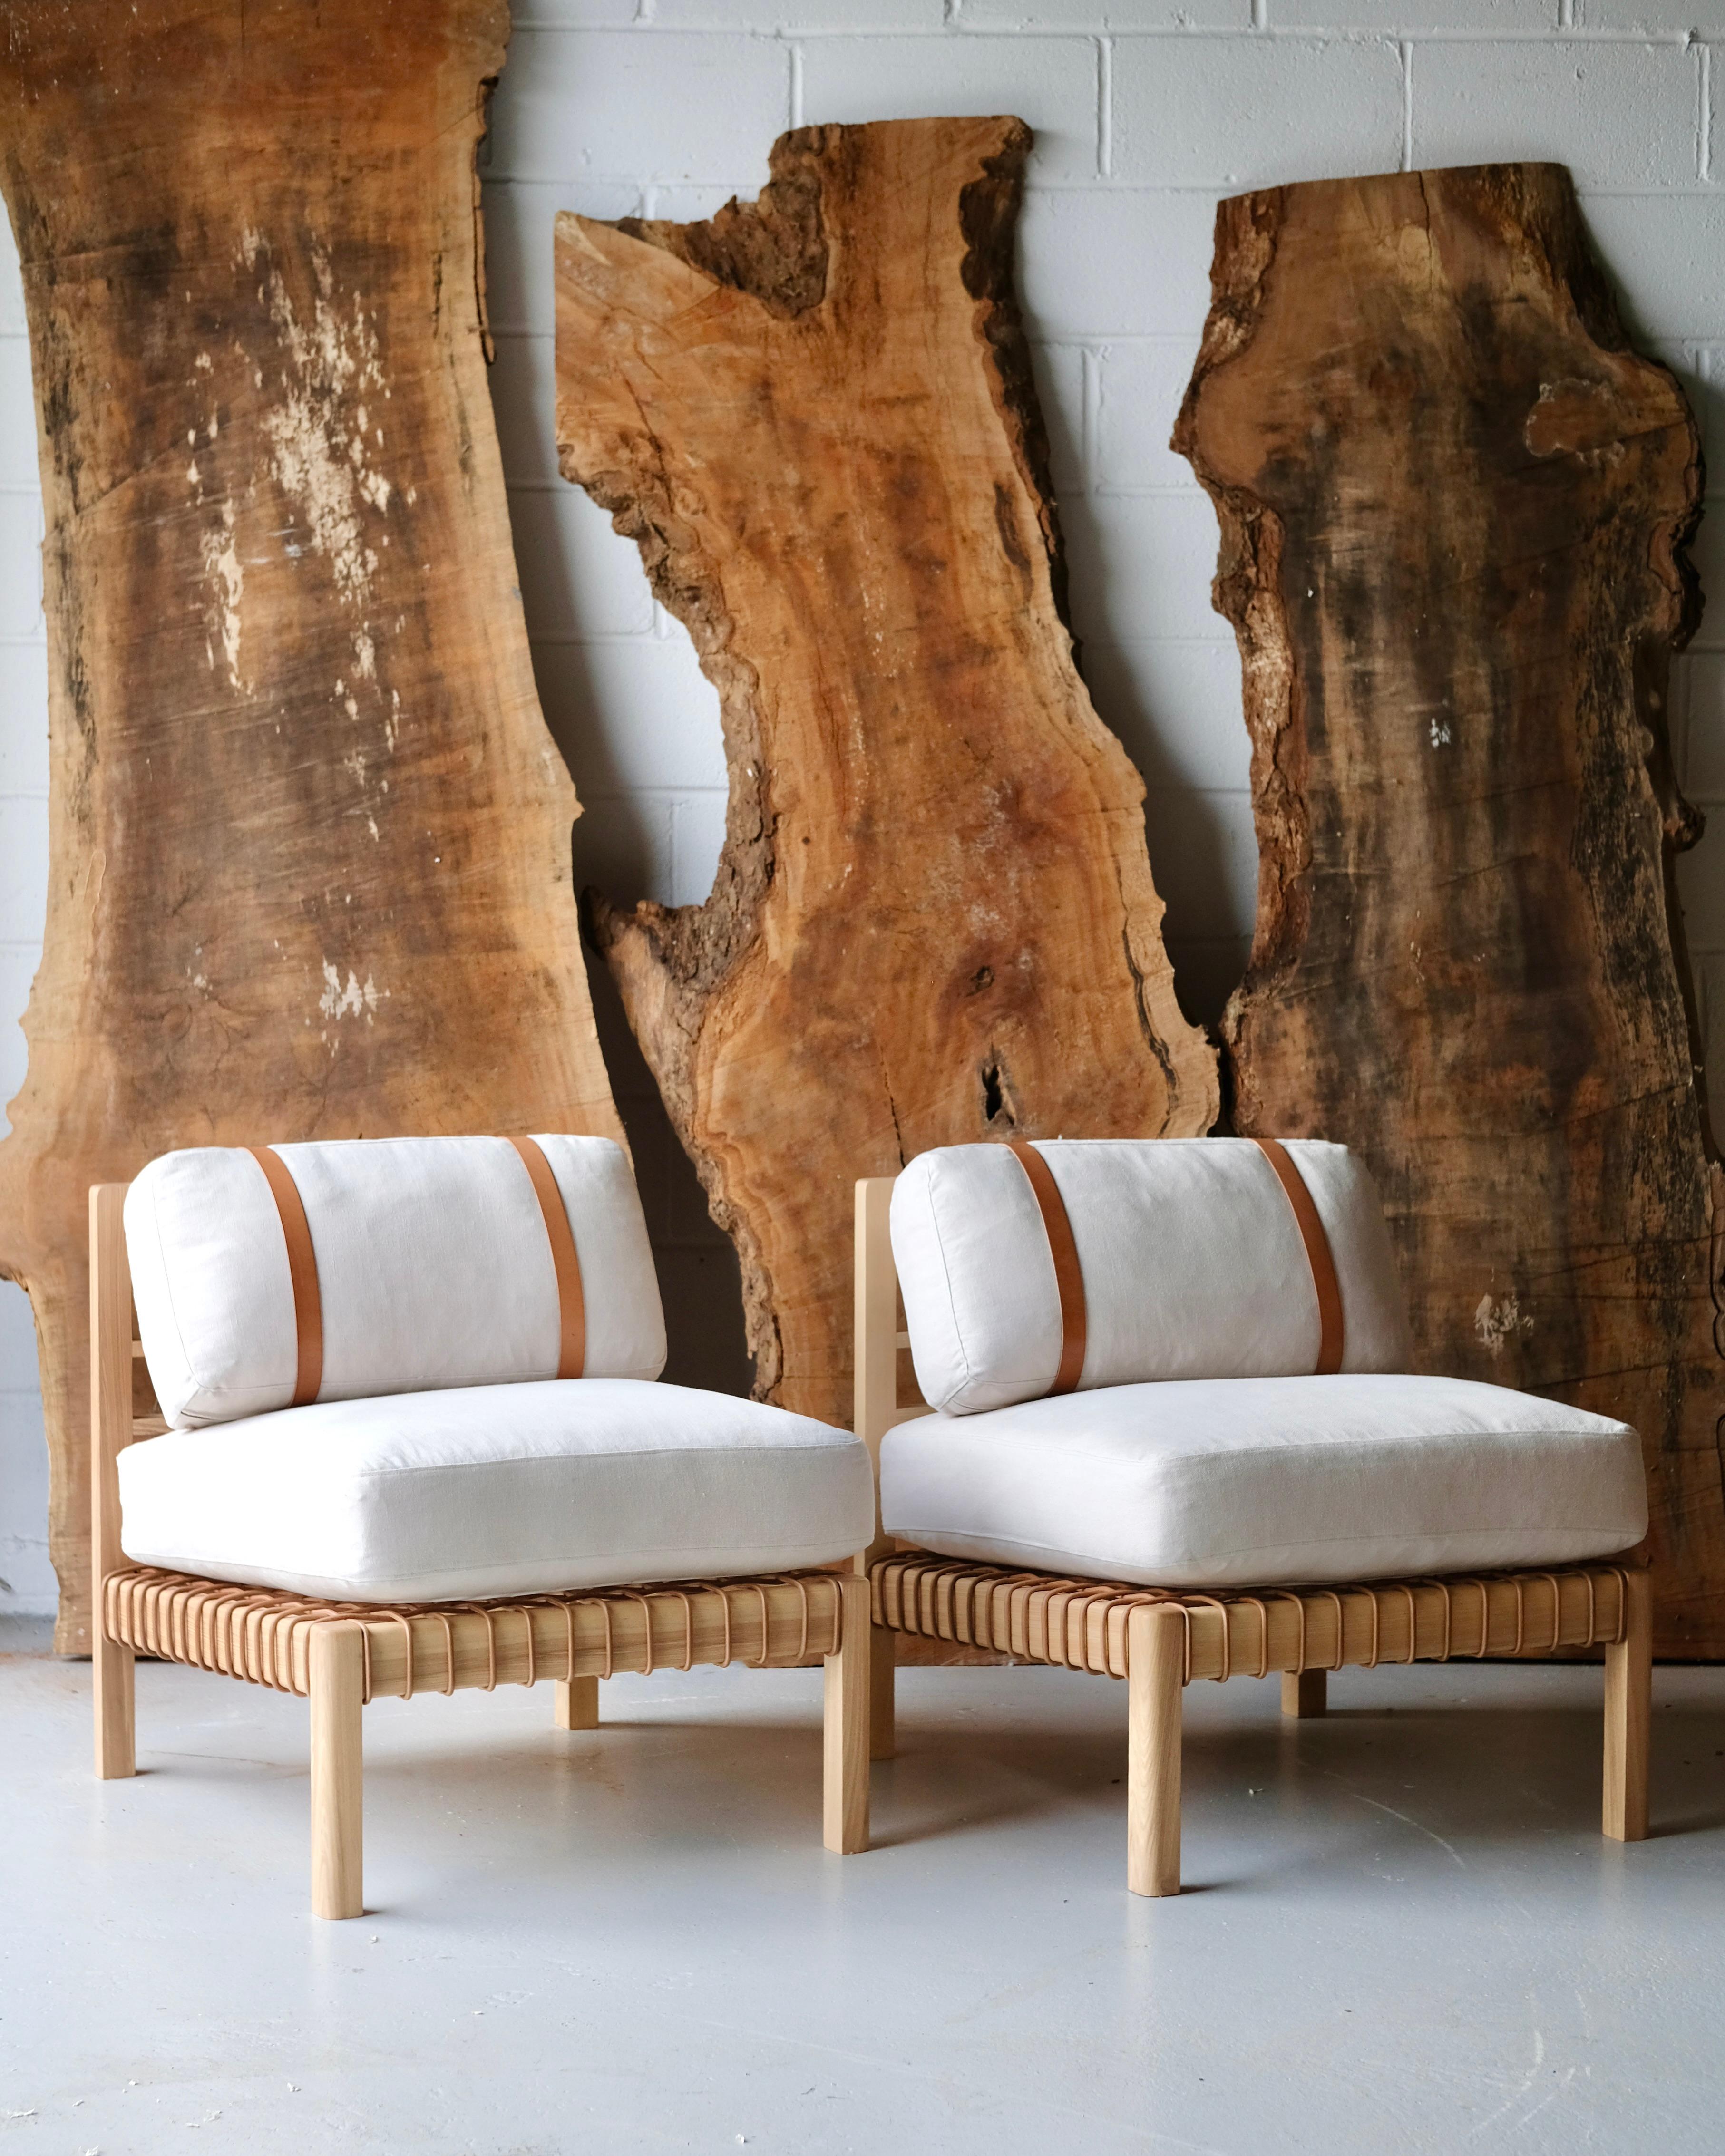 Large panels of meticulously stitched French linen or whole shoulders of Tuscan vegetable tanned leather form the basis for this exposed timber framed easy chair. The Mochi uses three types of leatherwork to create a simple but beautifully detailed